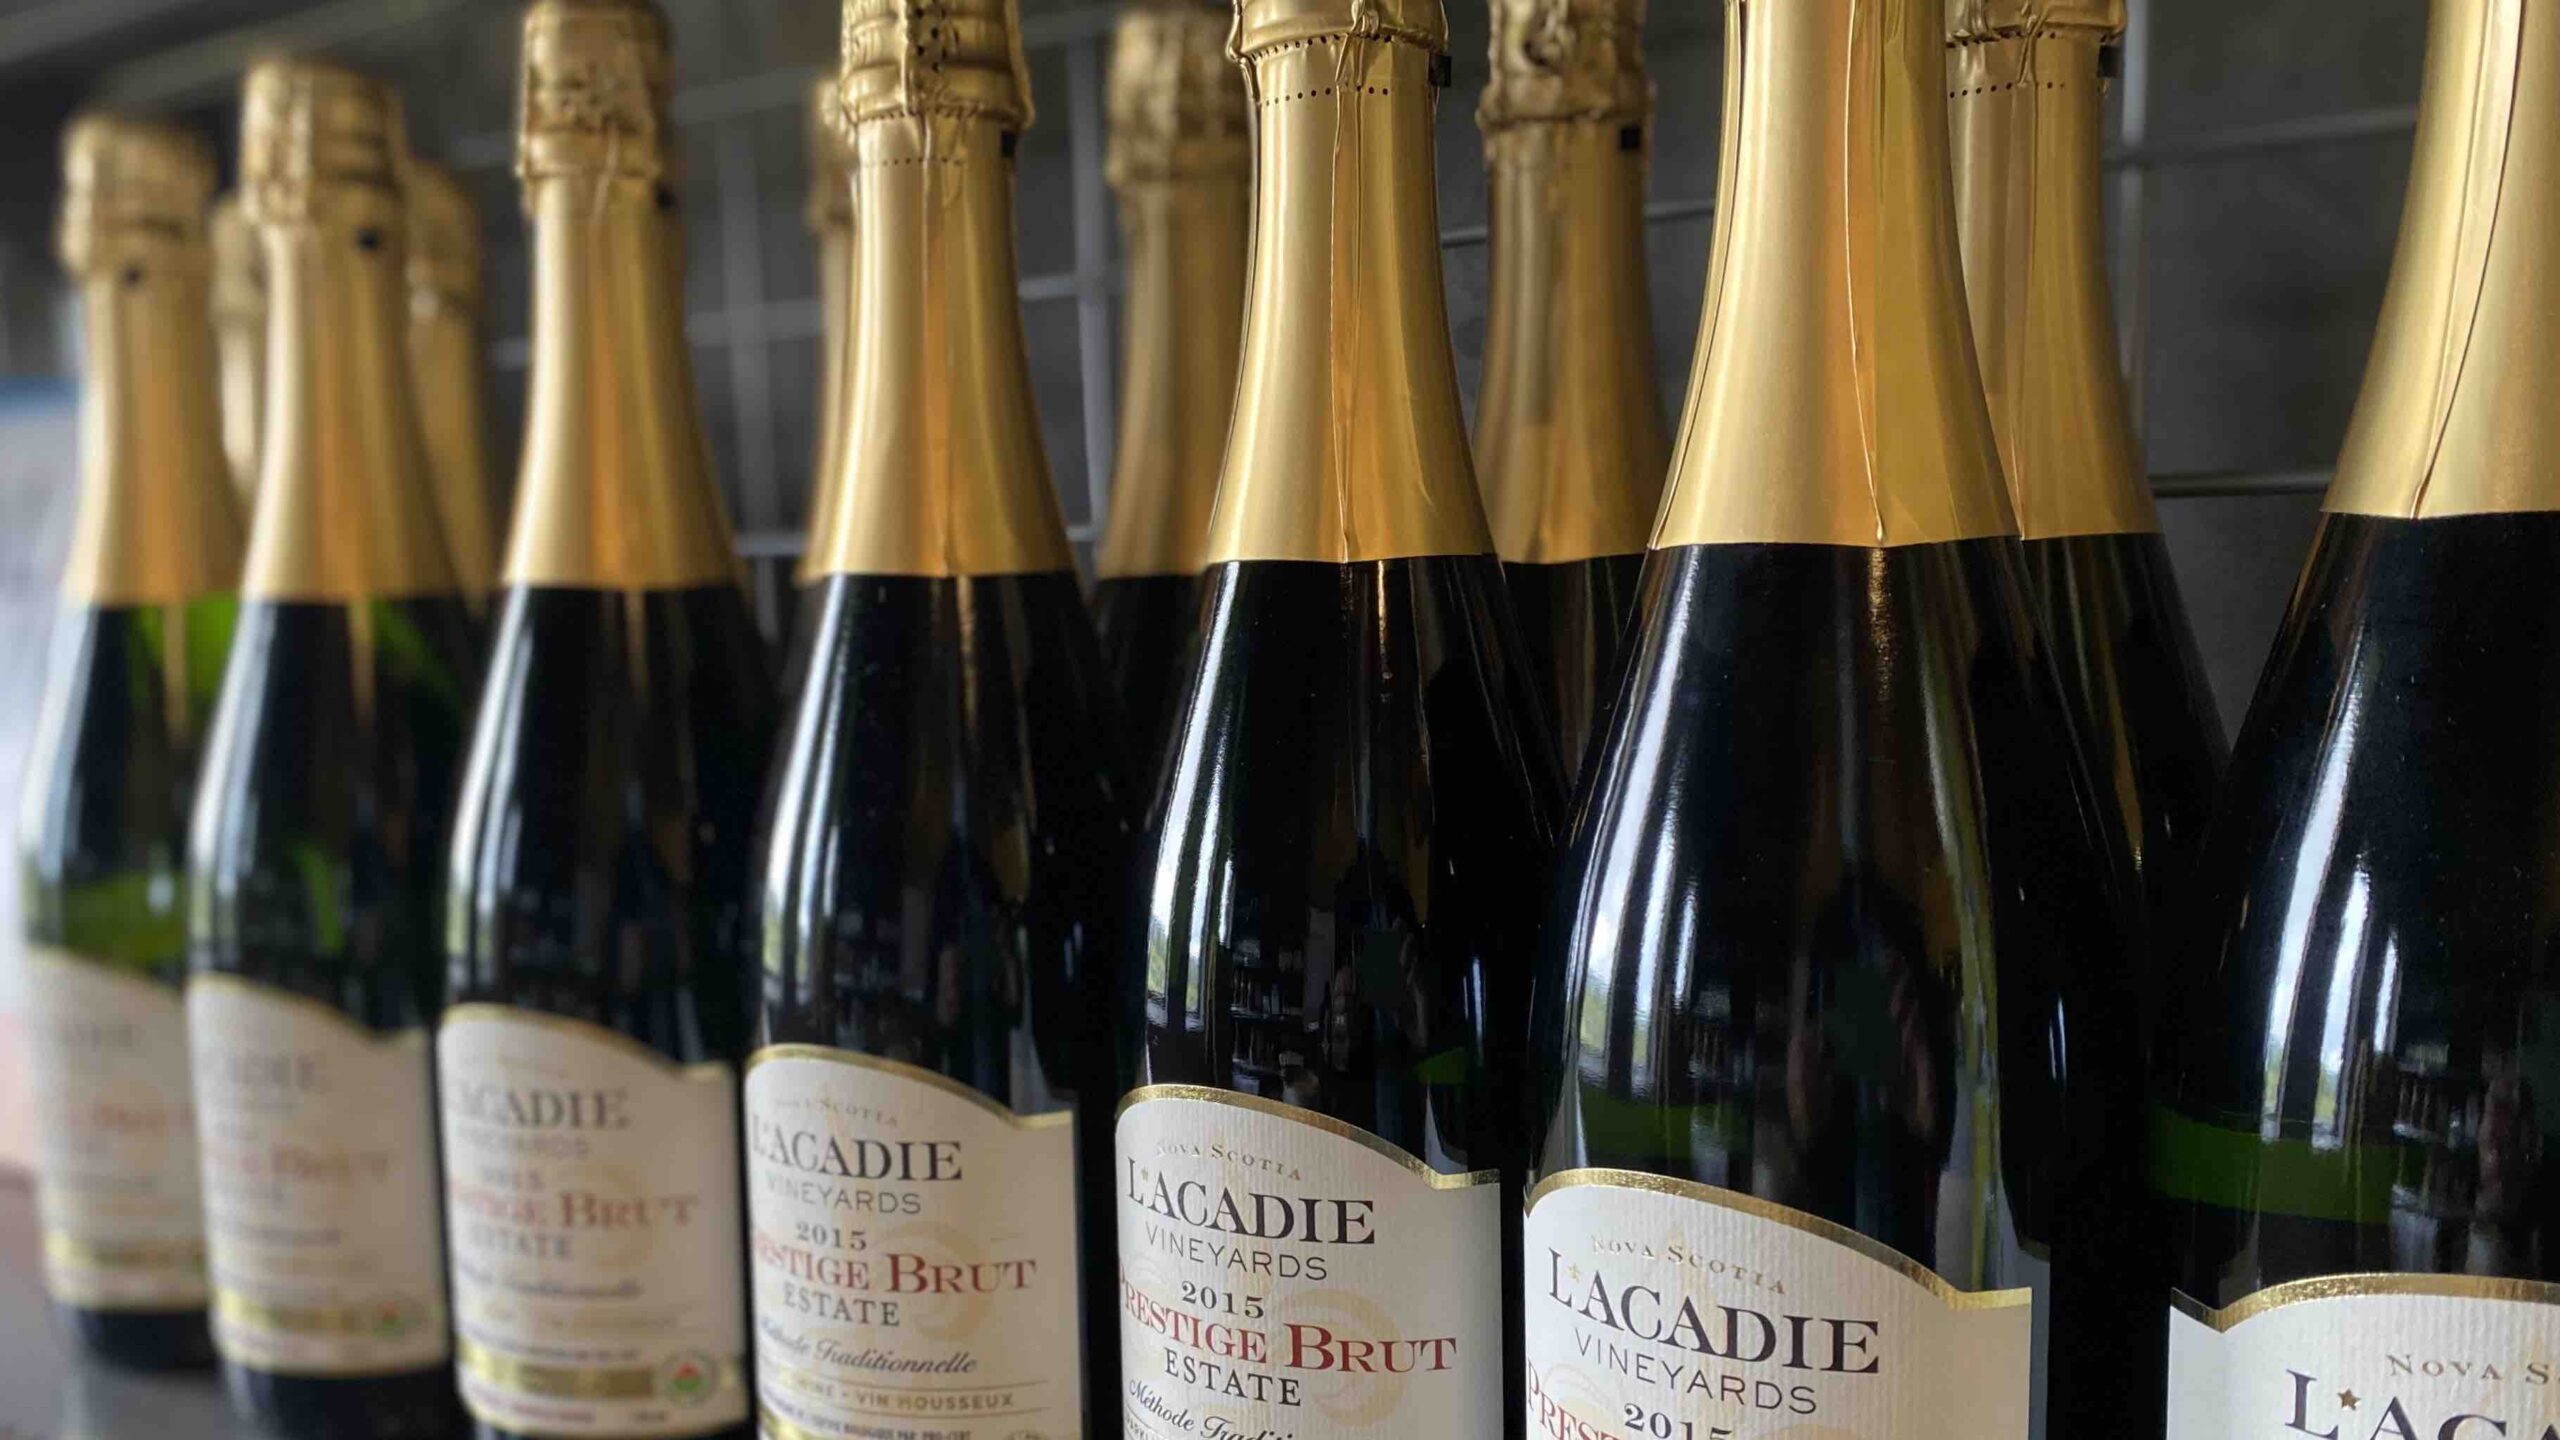 L'Acadie champagne on shelves seen during a Nova Scotia wine tour